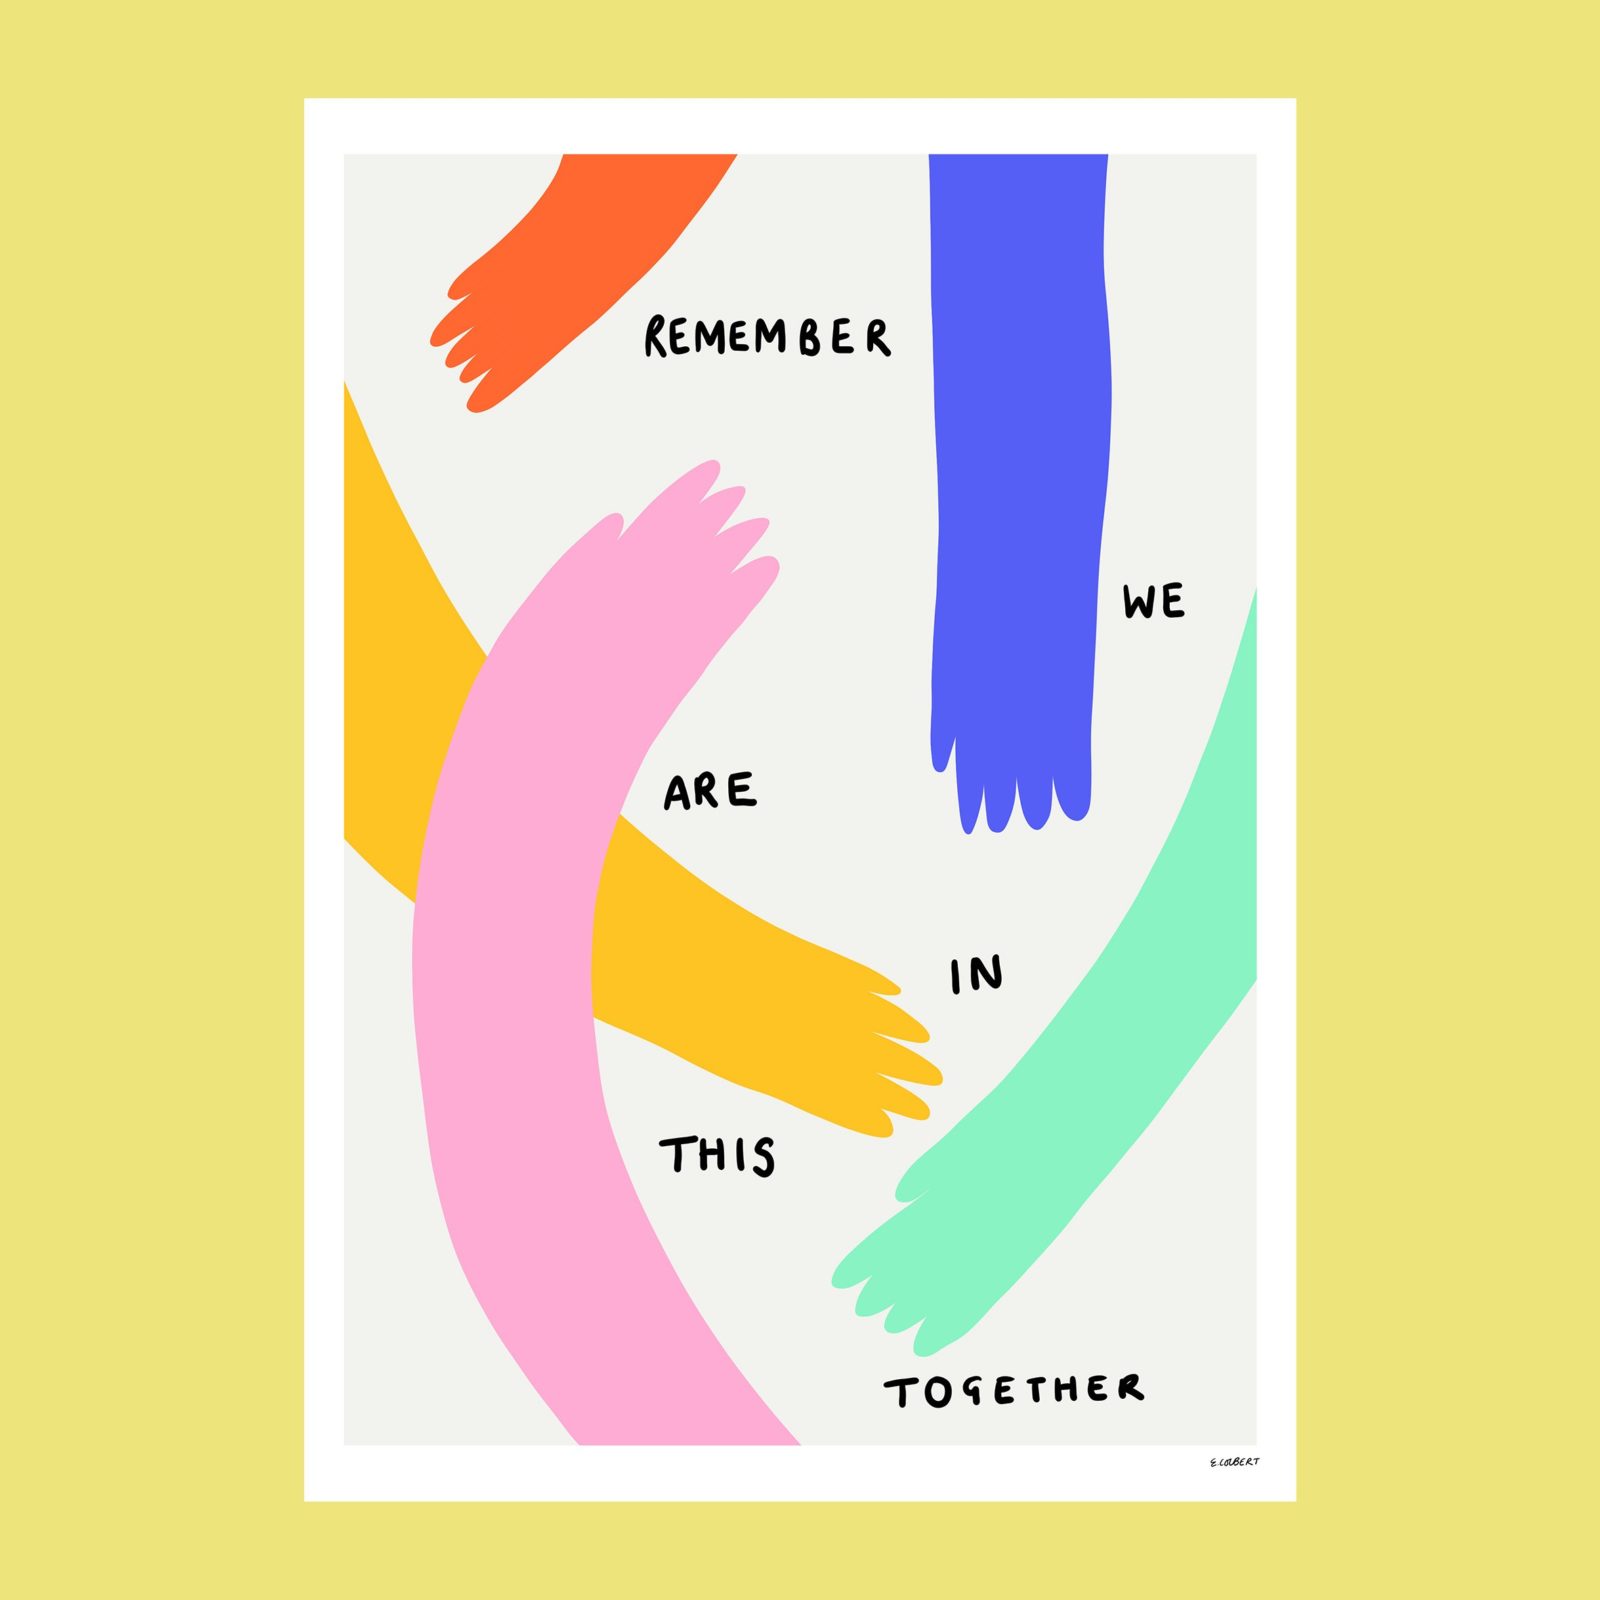 Simple illustrations of arms reaching towards the middle of the page, some crossing over reach other, they are all different colours including orange, blue, green, light pink and yellow. There are hand written words scattered across the page reading 'Remember we are in this together'.